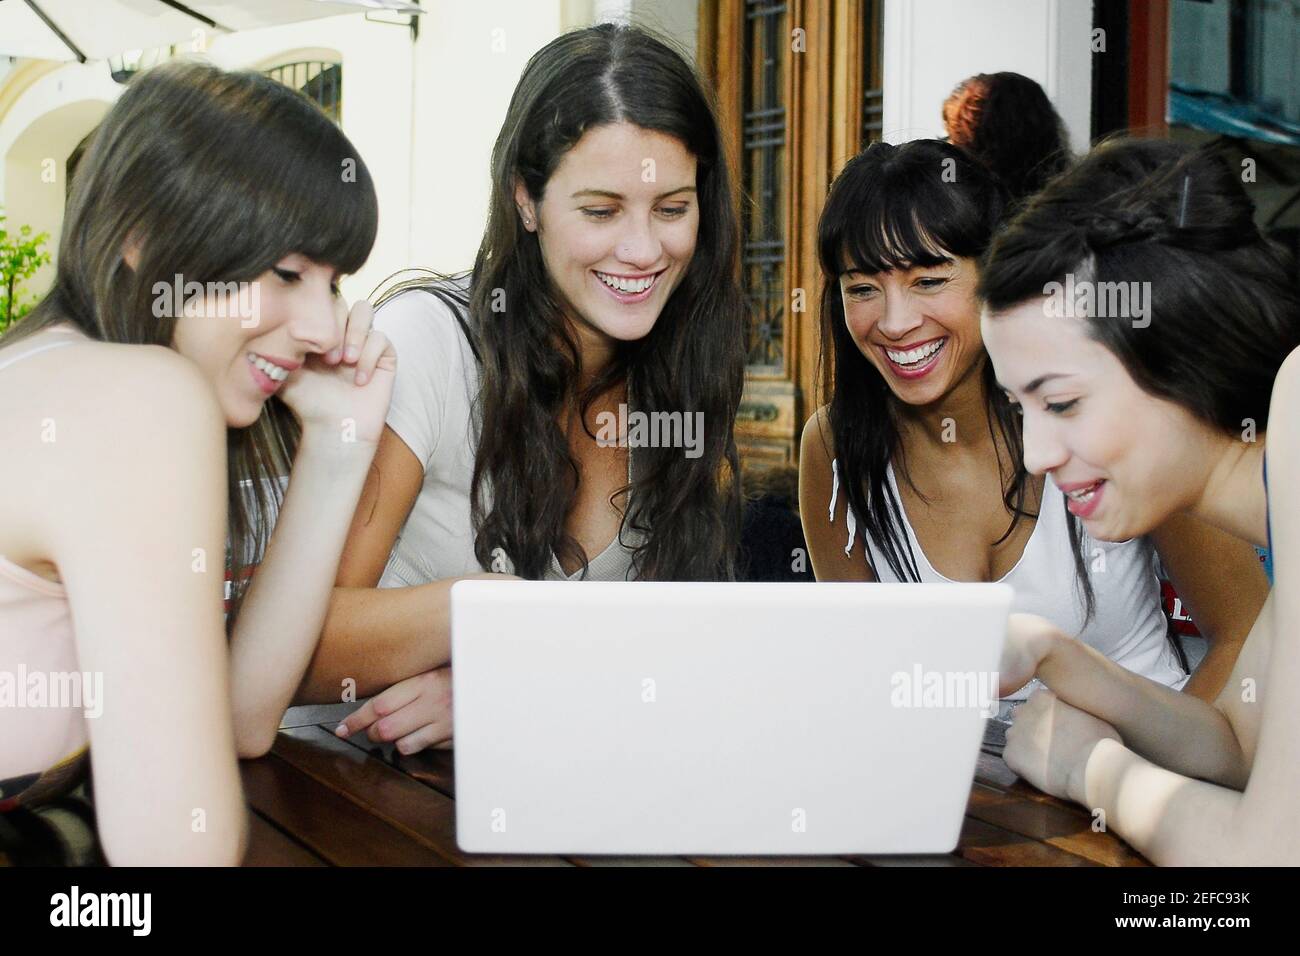 Two mid adult women and two young women smiling using a laptop Stock Photo